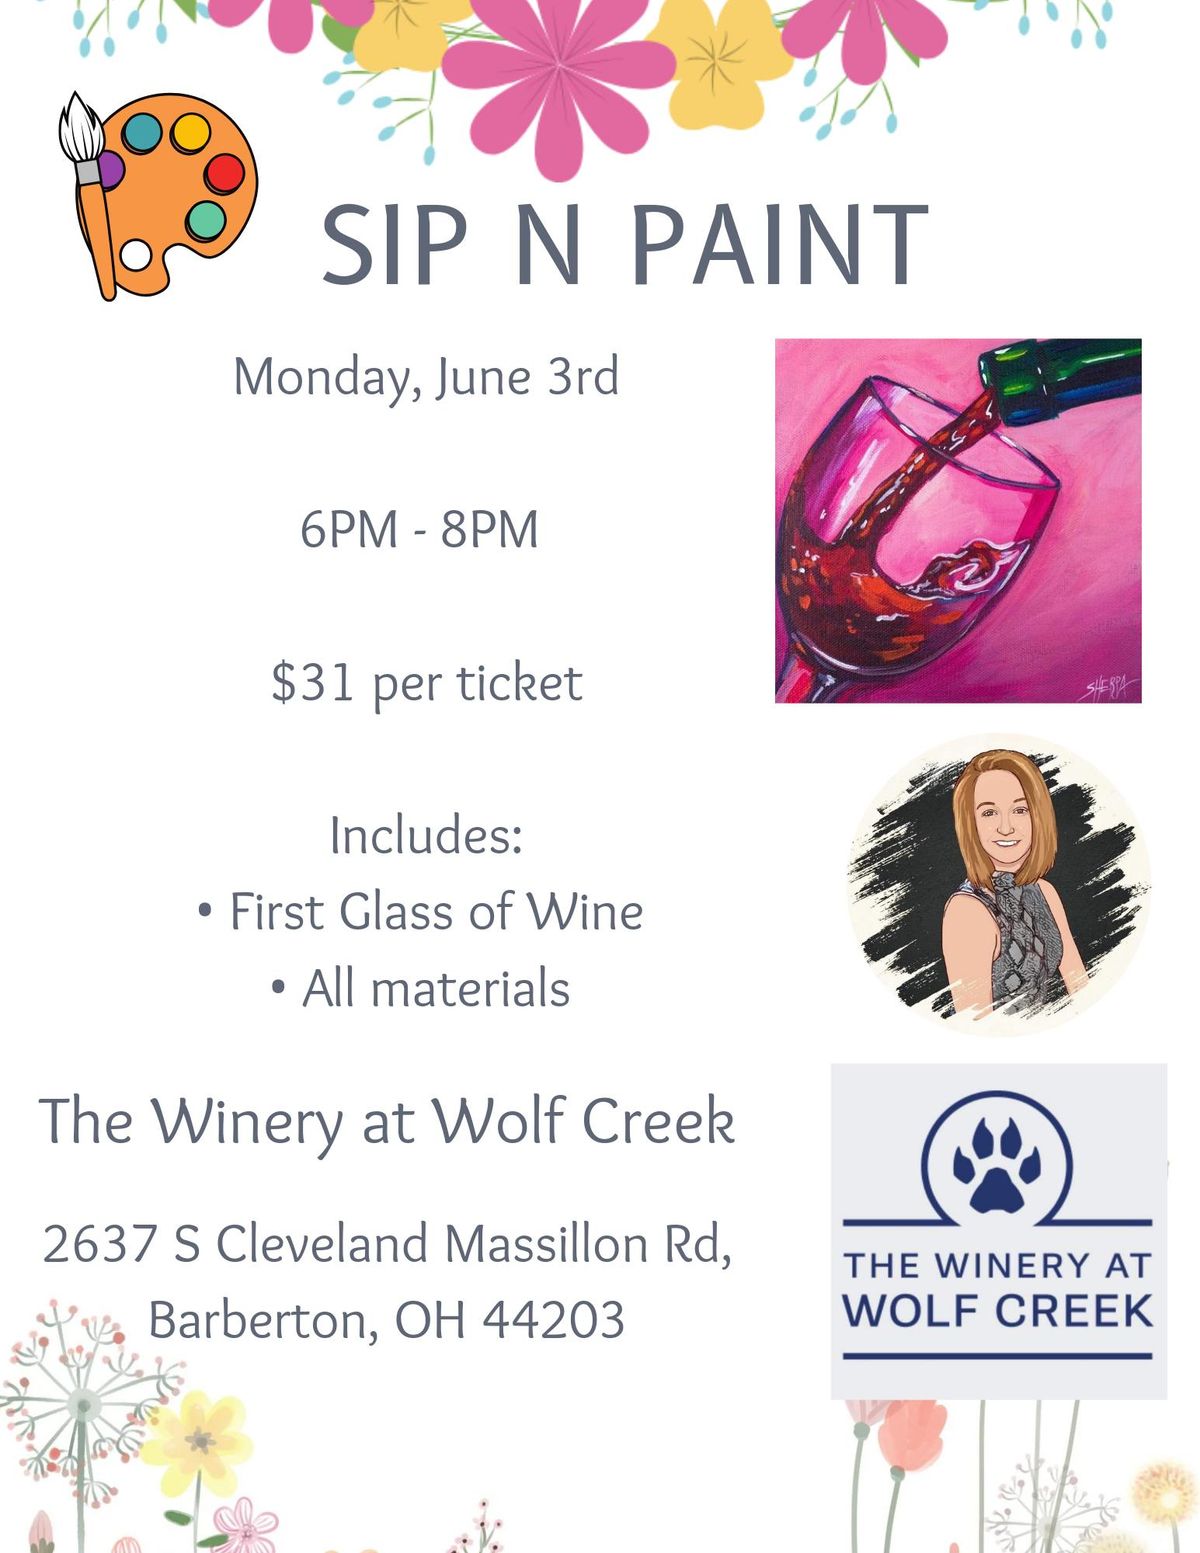 Sip N Paint At The Winery at Wolf Creek